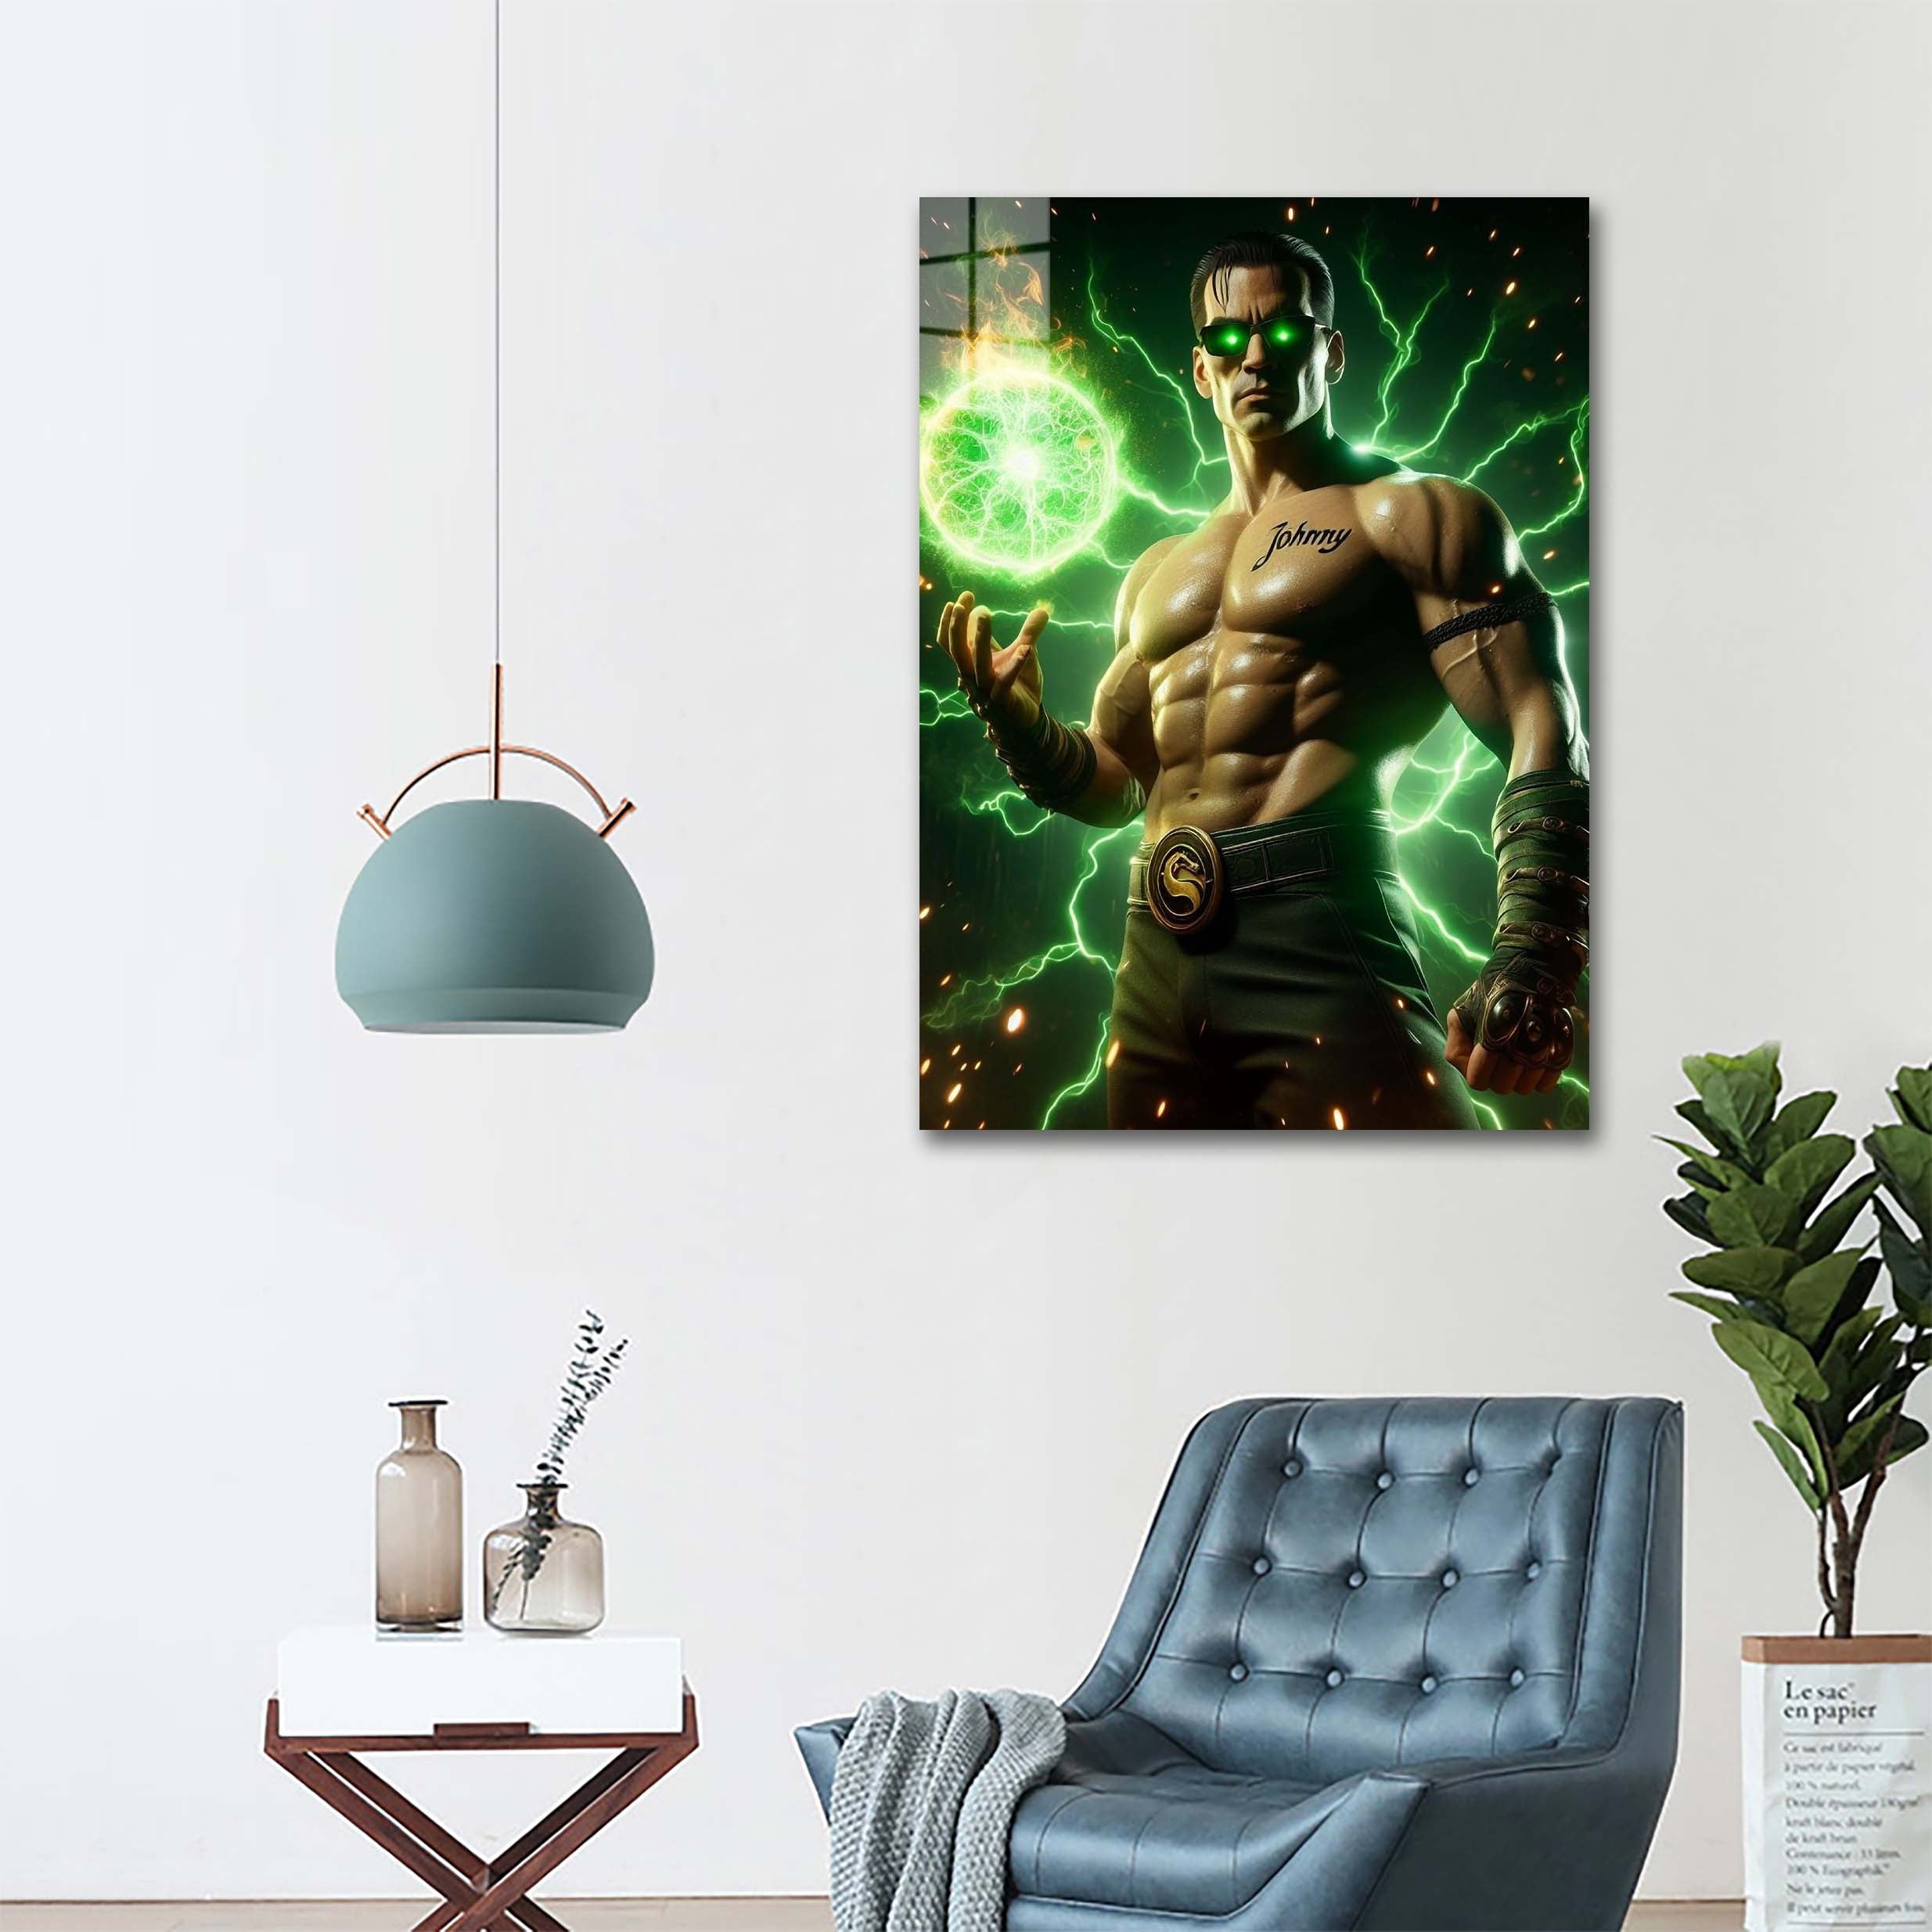 johnny cage-designed by @neonworld